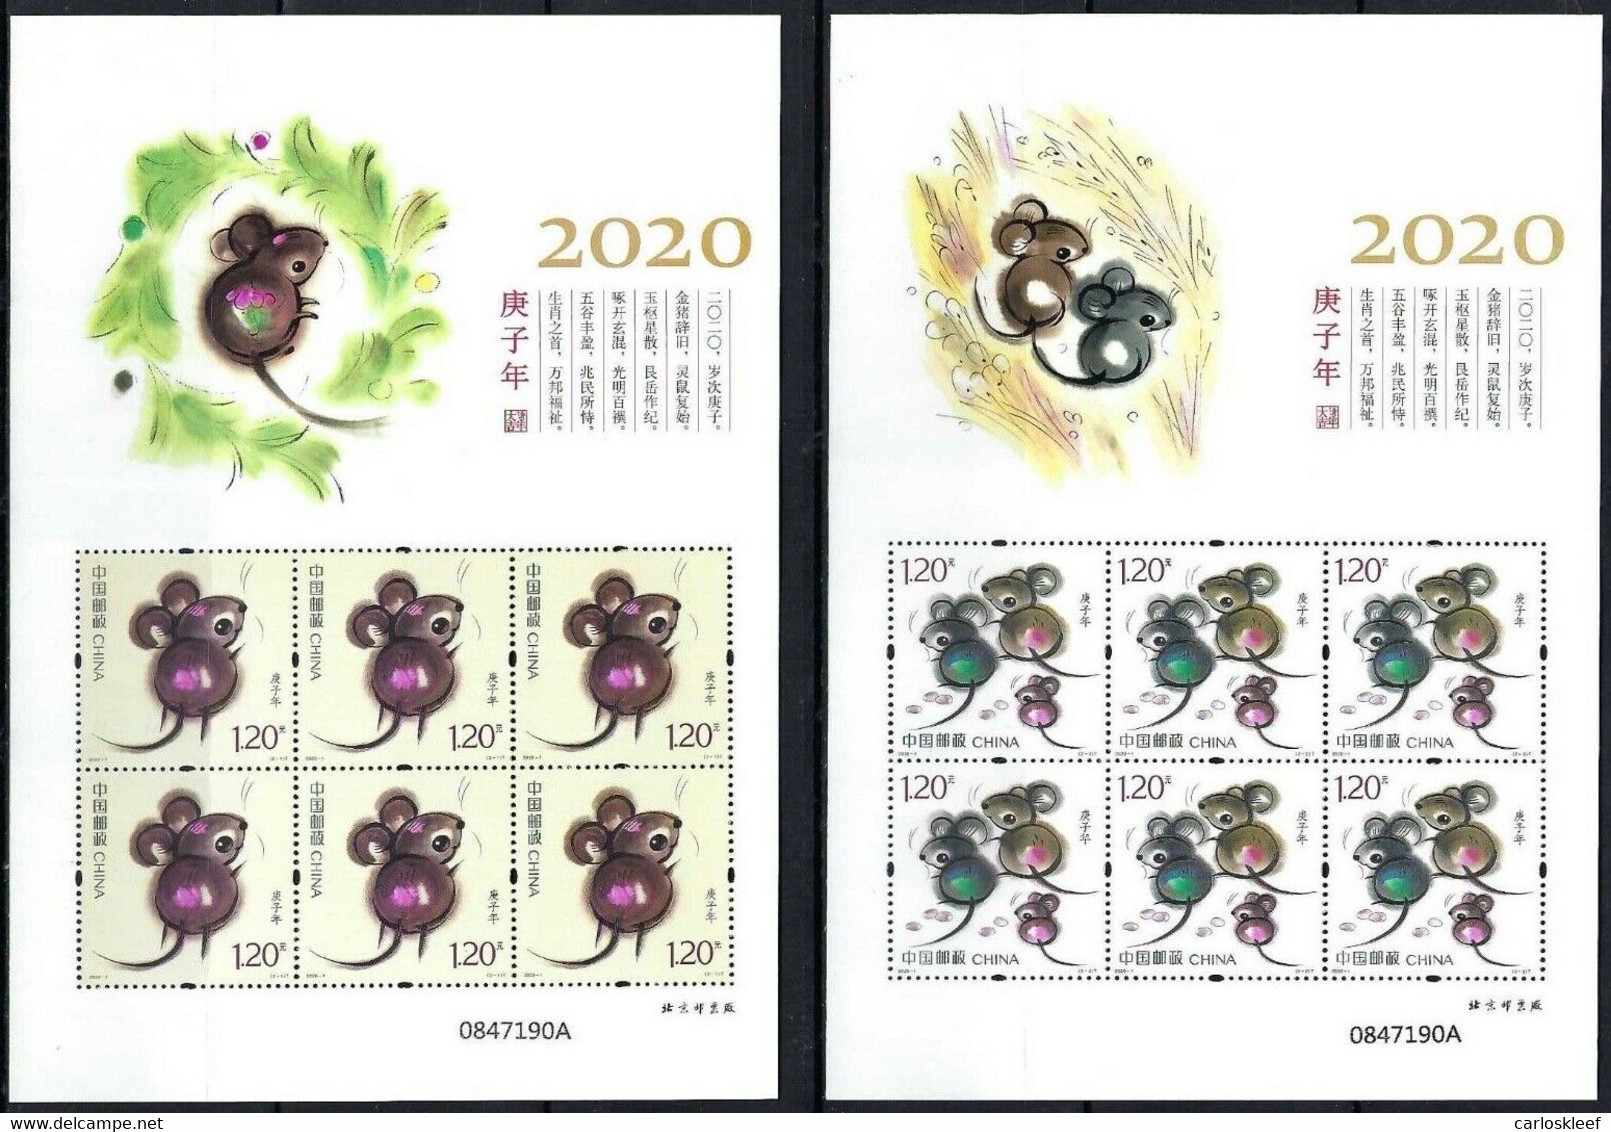 CHINA 2020 (2020-1)  Michel Vellen KB  - Mint Never Hinged - Neuf Sans Charniere - Unused Stamps